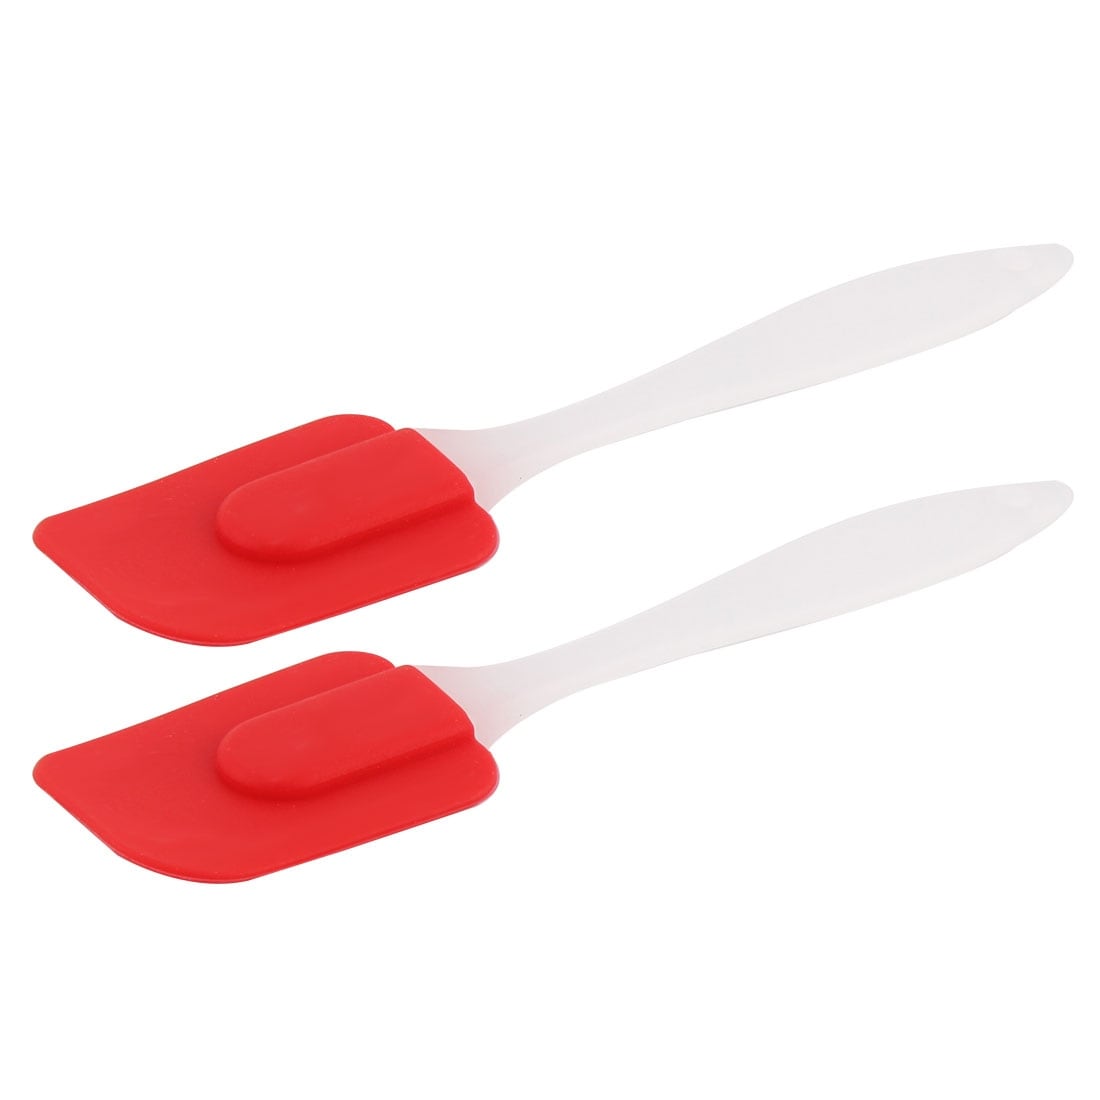 https://ak1.ostkcdn.com/images/products/is/images/direct/bbbef8828eb710e50f586f13bd180f9def7c78bf/Kitchen-Silicone-Head-Plastic-Handle-Nonstick-Spatula-Scraper-Red-2-PCS.jpg